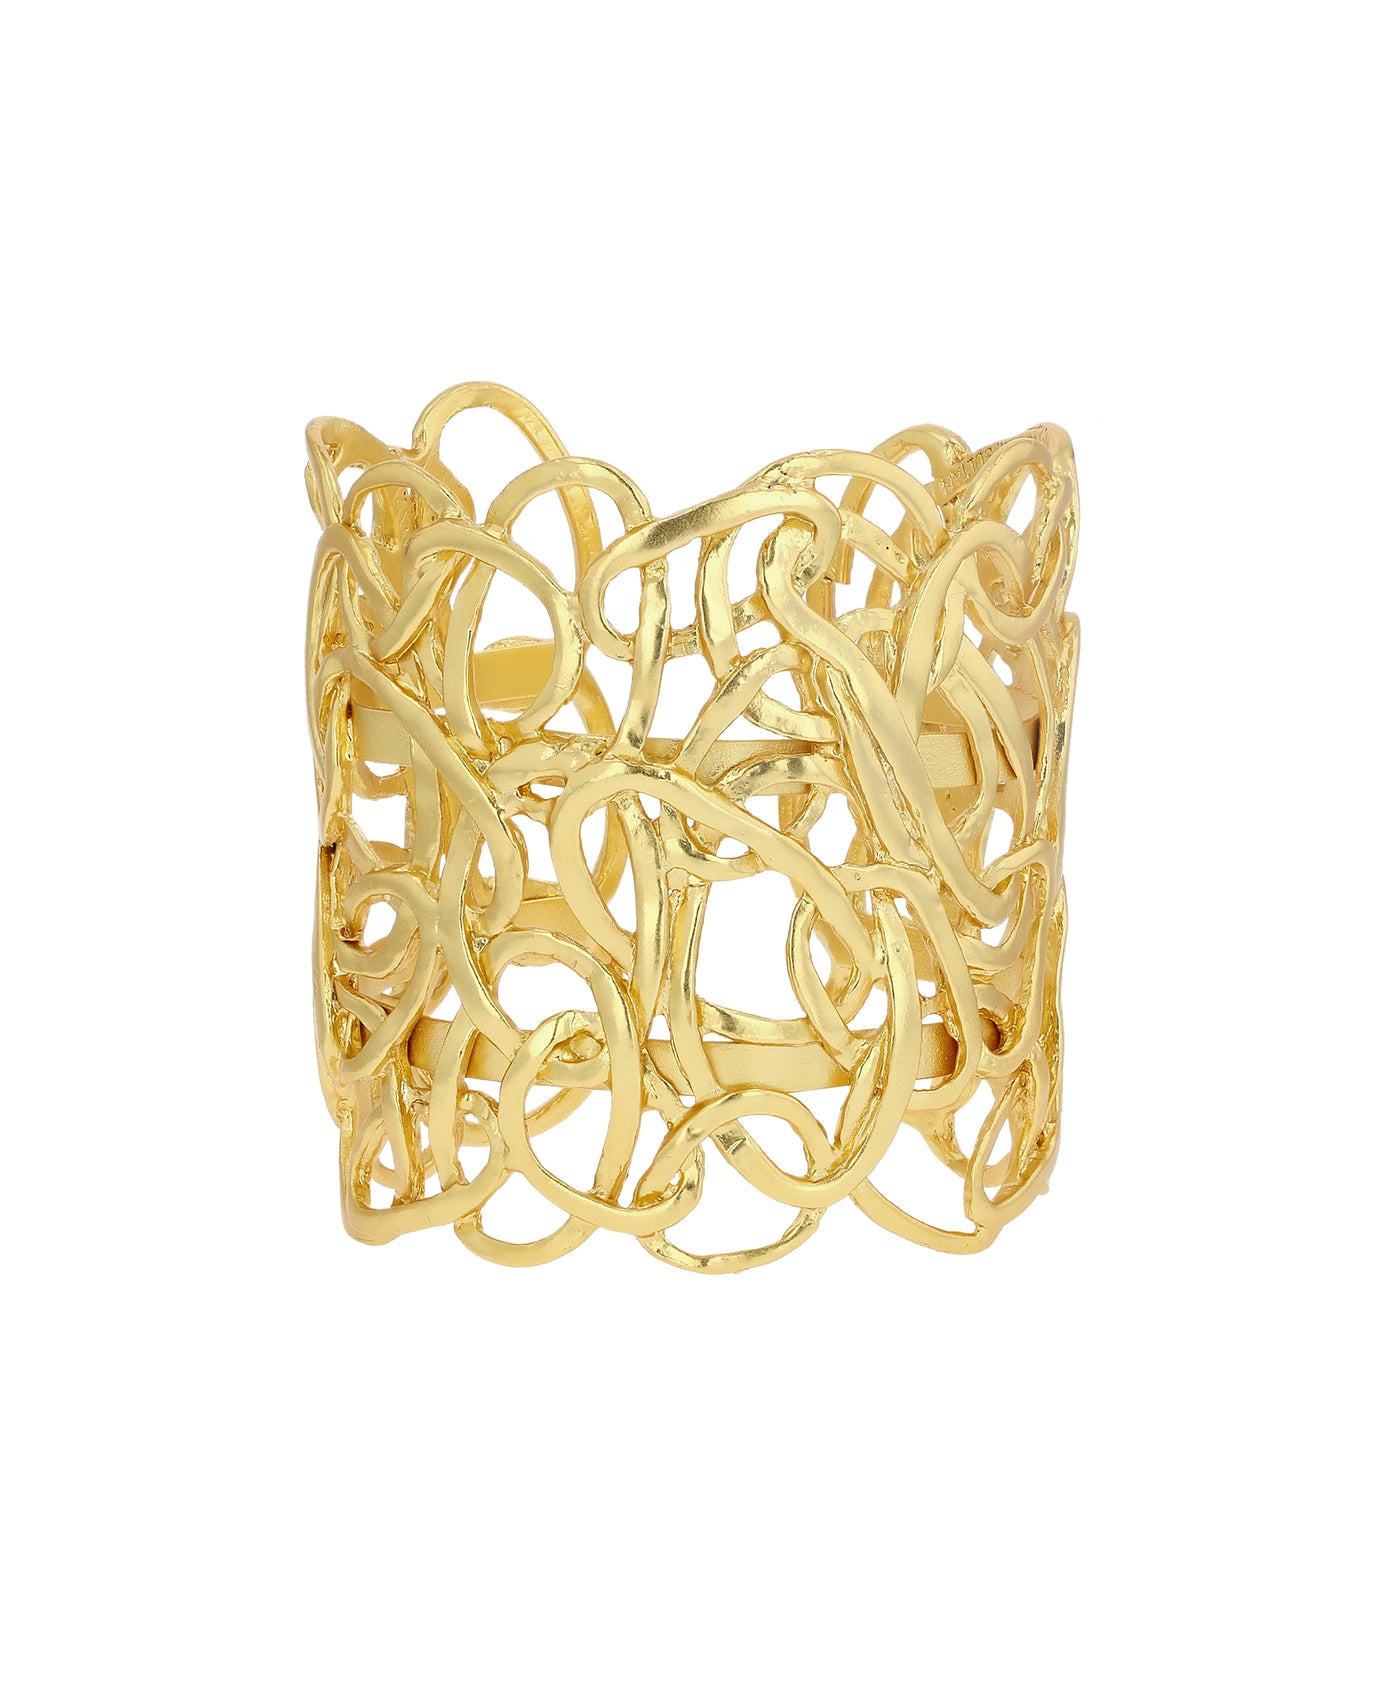 Abstract Metal Cuff Bracelet image 1